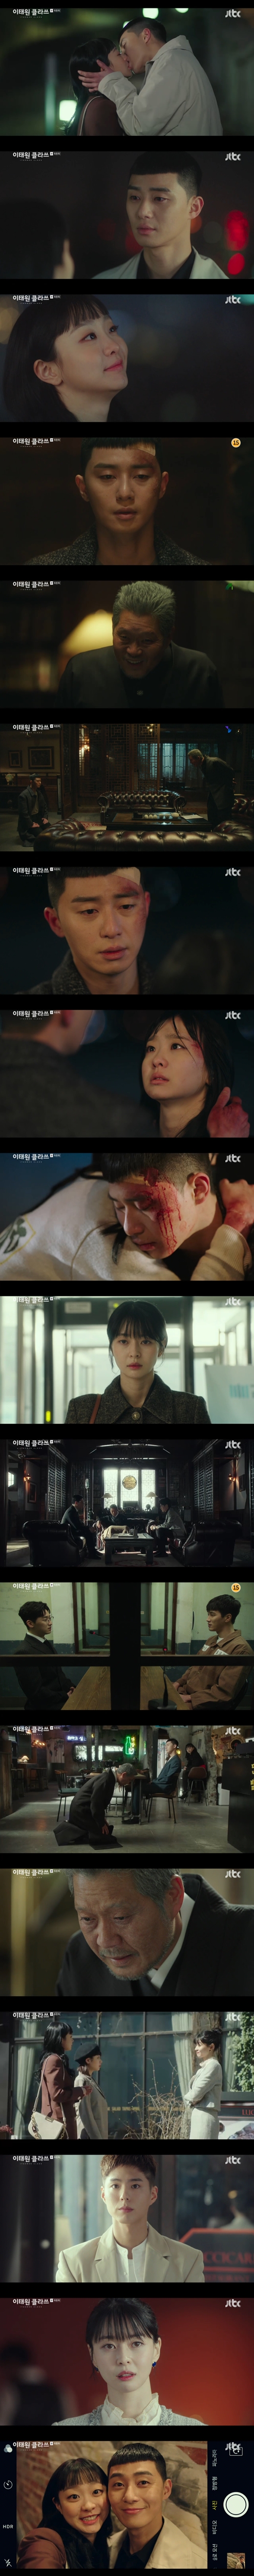 It was the perfect happy endings.In the last episode of JTBCs Golden Earth Drama Itaewon Clath (played by Cho Kwang-jin, directed by Kim Sung-yoon), which was broadcast on the 21st, the story of Park Seo-joon, who achieved both revenge and love, was drawn.Roy, who woke up after the car accident, raised his sick body to save Joe-yool Lee (Kim Da-mi).Jang Dae-hee (Yoo Jae-myung) demanded a price to tell the location of Joe-yool Lee, which was held by Jang (Season Bo-hyun), and Park fell to his knees without hesitation.When Jang smiled, Roy said, Ive been living with vengeance, and this man, Jang Dae-hee, was both the enemy who drove my life to hell and a great man.Ive been following you through life. I thought it was worth it to this fight.I am sorry for the time when such a man was trying to catch up with an ugly old man, so he kneels against the hostage. I knew you only after ten years. Jang Dae-hee looked bewildered.Soon, when Joe-yool Lee was in crisis, Roy and Choi Seung-kwon appeared in front of him.Park and Choi fought with The Fountainhead and Kim Hee-hoon (Won Hyun-joon) and eventually managed to save Joe-yol Lee.Roy finally confessed his love to Joe-yool Lee.Then, Osun Naras corruption scandal brought down Changs price; Roys IC group moved to take over the collapsed Changs price, and Jang went to visit Roy to prevent it.I sincerely apologize. I did wrong. Jang Dae-hee, who kneeled and wept. But Park said, Do I look like a hugu? I am a trader.What is the value of an apology after you lose all of your corporate acquisitions? Business. Chairman. Roys IC acquired the market price.It was the perfect finish of revenge.And after the event was over, the stories of the characters were introduced in turn: Osua, who had arranged her mind for Park, began a new life as a restaurant boss.The restaurant was joined by Hunan Chef (Park Bo-gum).The story of Choi Seung-kwon and Ma Hyun-yi (Lee Joo-young), who had a strange relationship as if they were not Thumbs, was still ongoing.Drama also ended with the appearance of Roy and Joe-yool Lee, who enjoy dating on the backdrop of Itaewon Street.Itaewon Clath has been loved by viewers by offering exciting and exciting catharsis through the hip rebellion of youth including Roy in the unreasonable world.Through Drama, Park Seo-joon showed off the appearance of King Drama who believed and saw, and new faces of the anbang such as Kim Da-mi, Lee Ju-young, Kwon Nara, Kim Dong-hee, Ryu Kyong-su,It was the best happy endings to do both inside and outside the work.